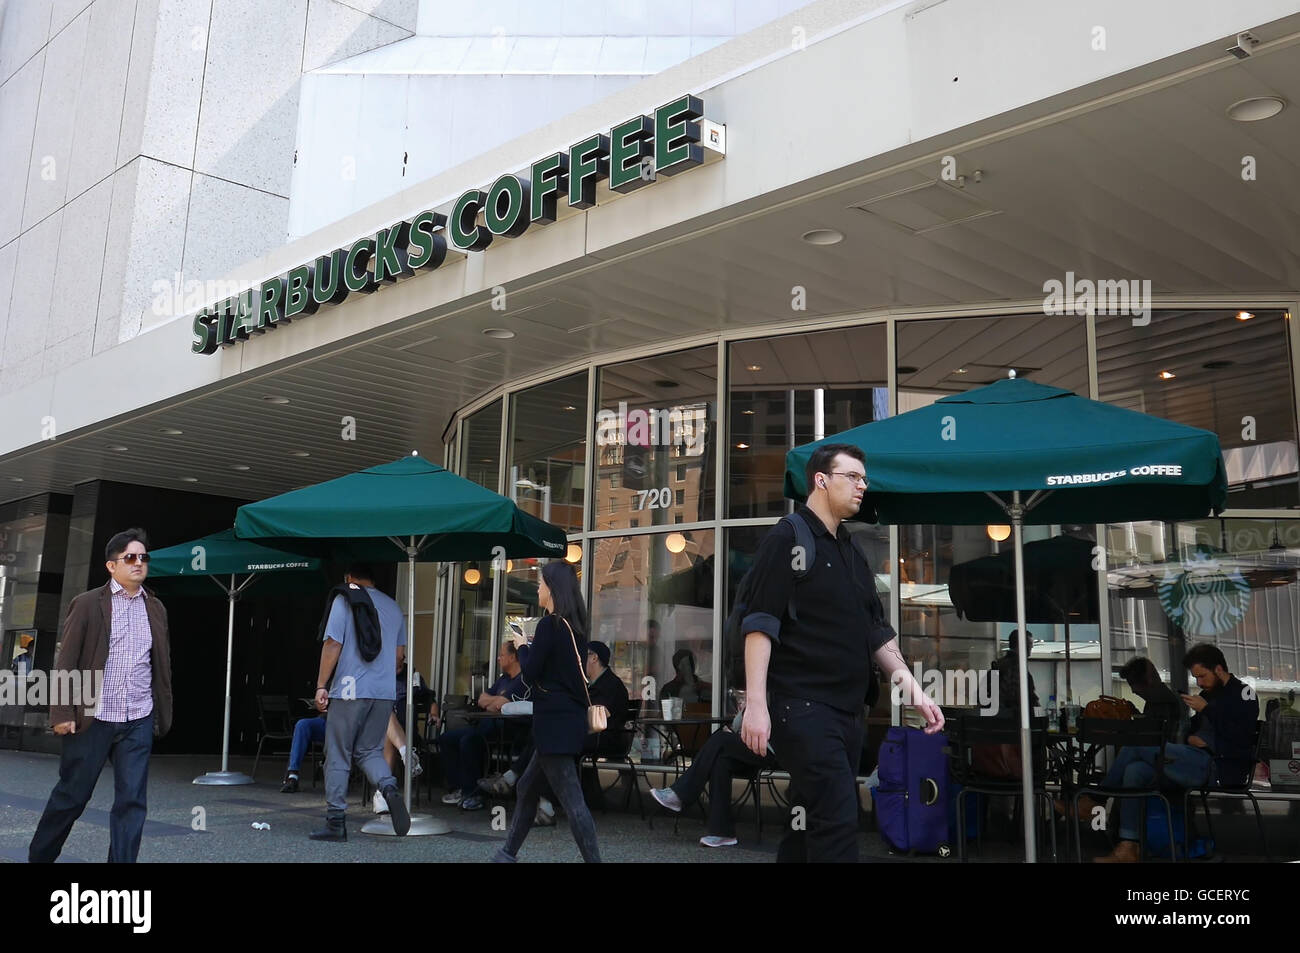 Vancouver, BC, Canada - April 22, 2016 : One side of Starbucks coffee on sunny day in downtown Vancouver Stock Photo